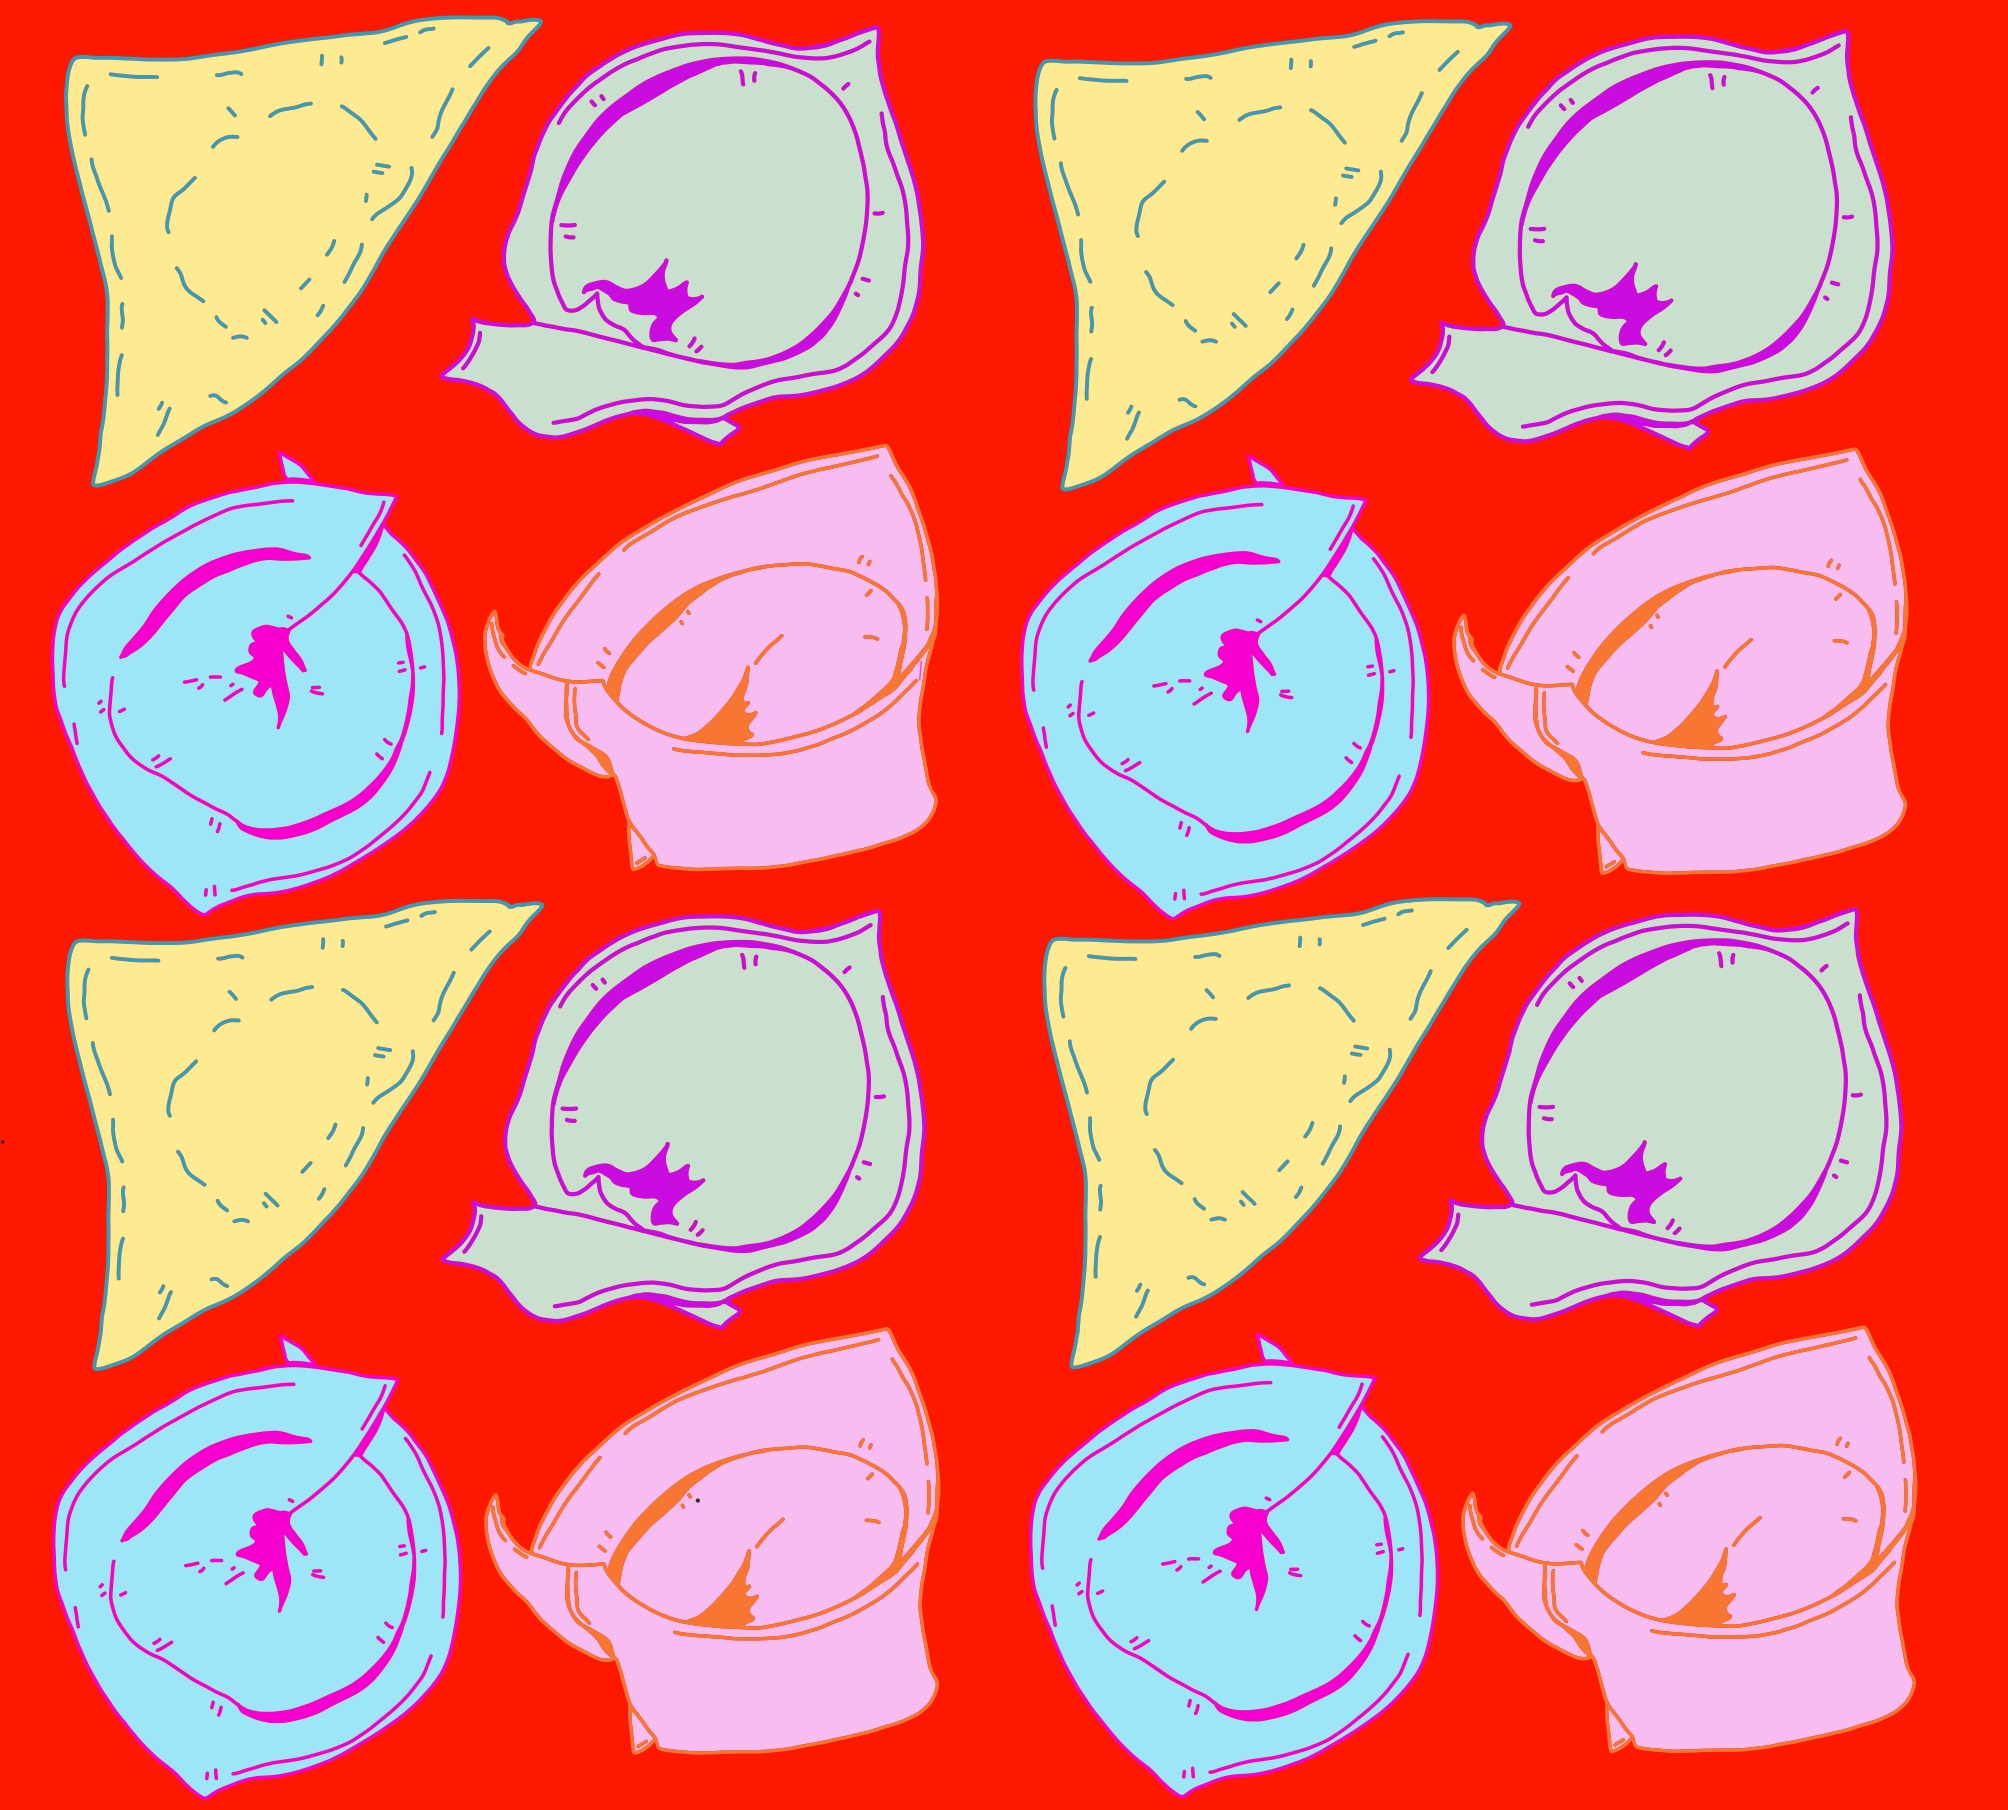 This is a playfully rendered digital drawing of 16 dumplings displayed in a square grid against a solid bright red background. Some of the dumplings feature a stuffed, folded square wonton wrapper in the shape of a triangle, and others are the finished dumpling with the corners folded together. The dumplings are drawn using contour lines and rendered with pops of yellow, blue, purple, pink, and orange.